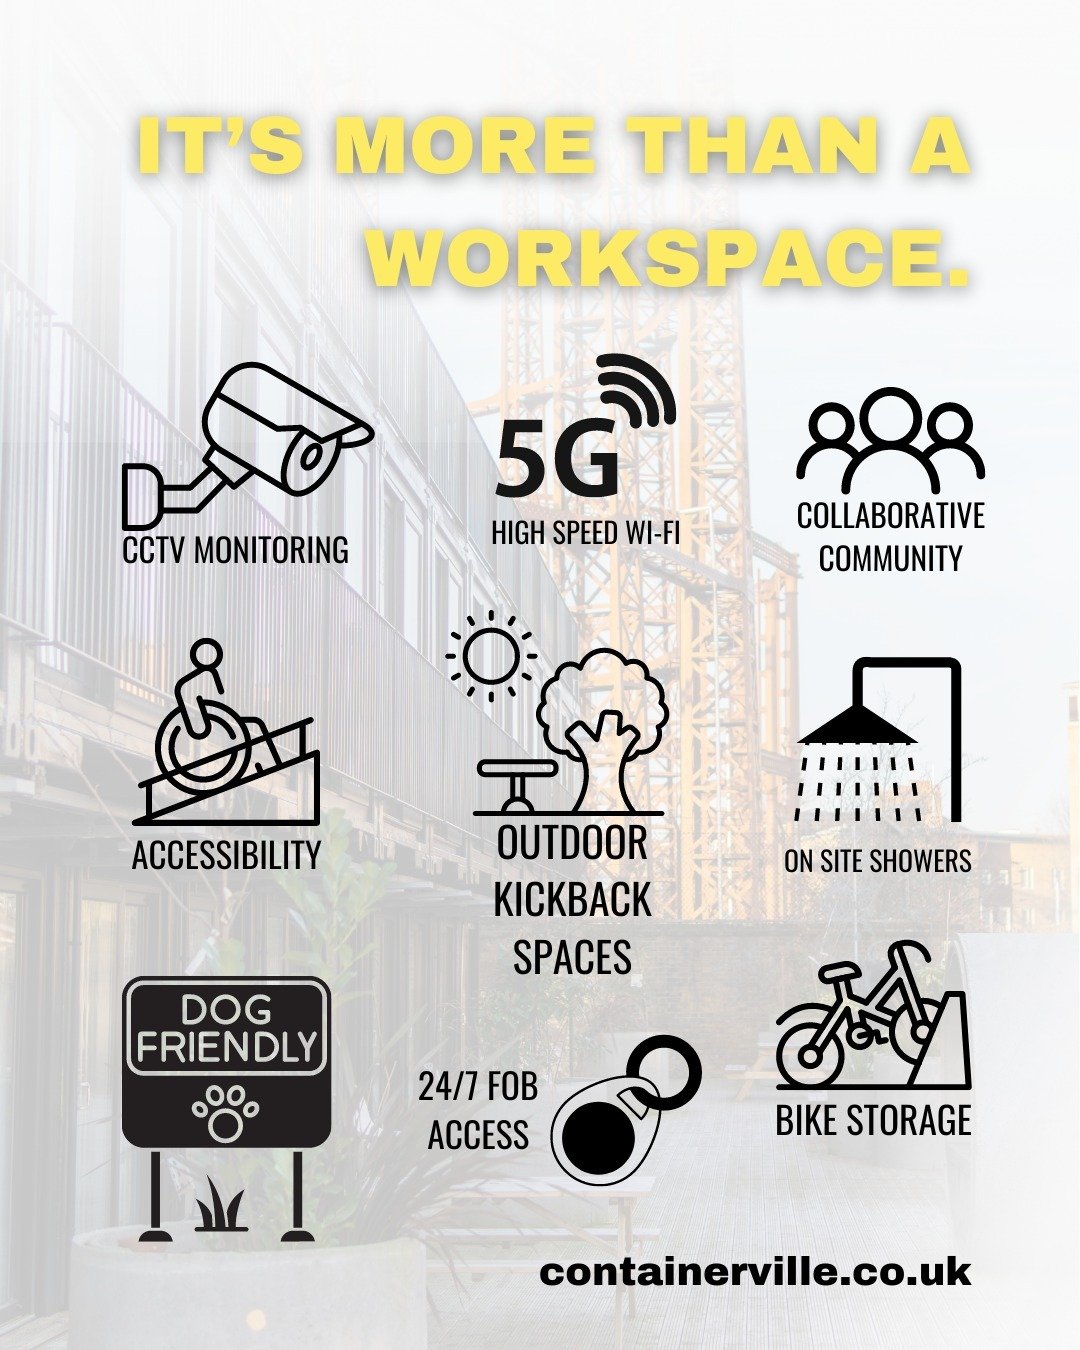 From superfast Wi-Fi to dog-friendly facilities, discover the amenities that make working at Containerville a breeze.

#MoreThanAWorkspace #DogFriendly #eastlondon
#Containerville #WorkPlaceCommunity